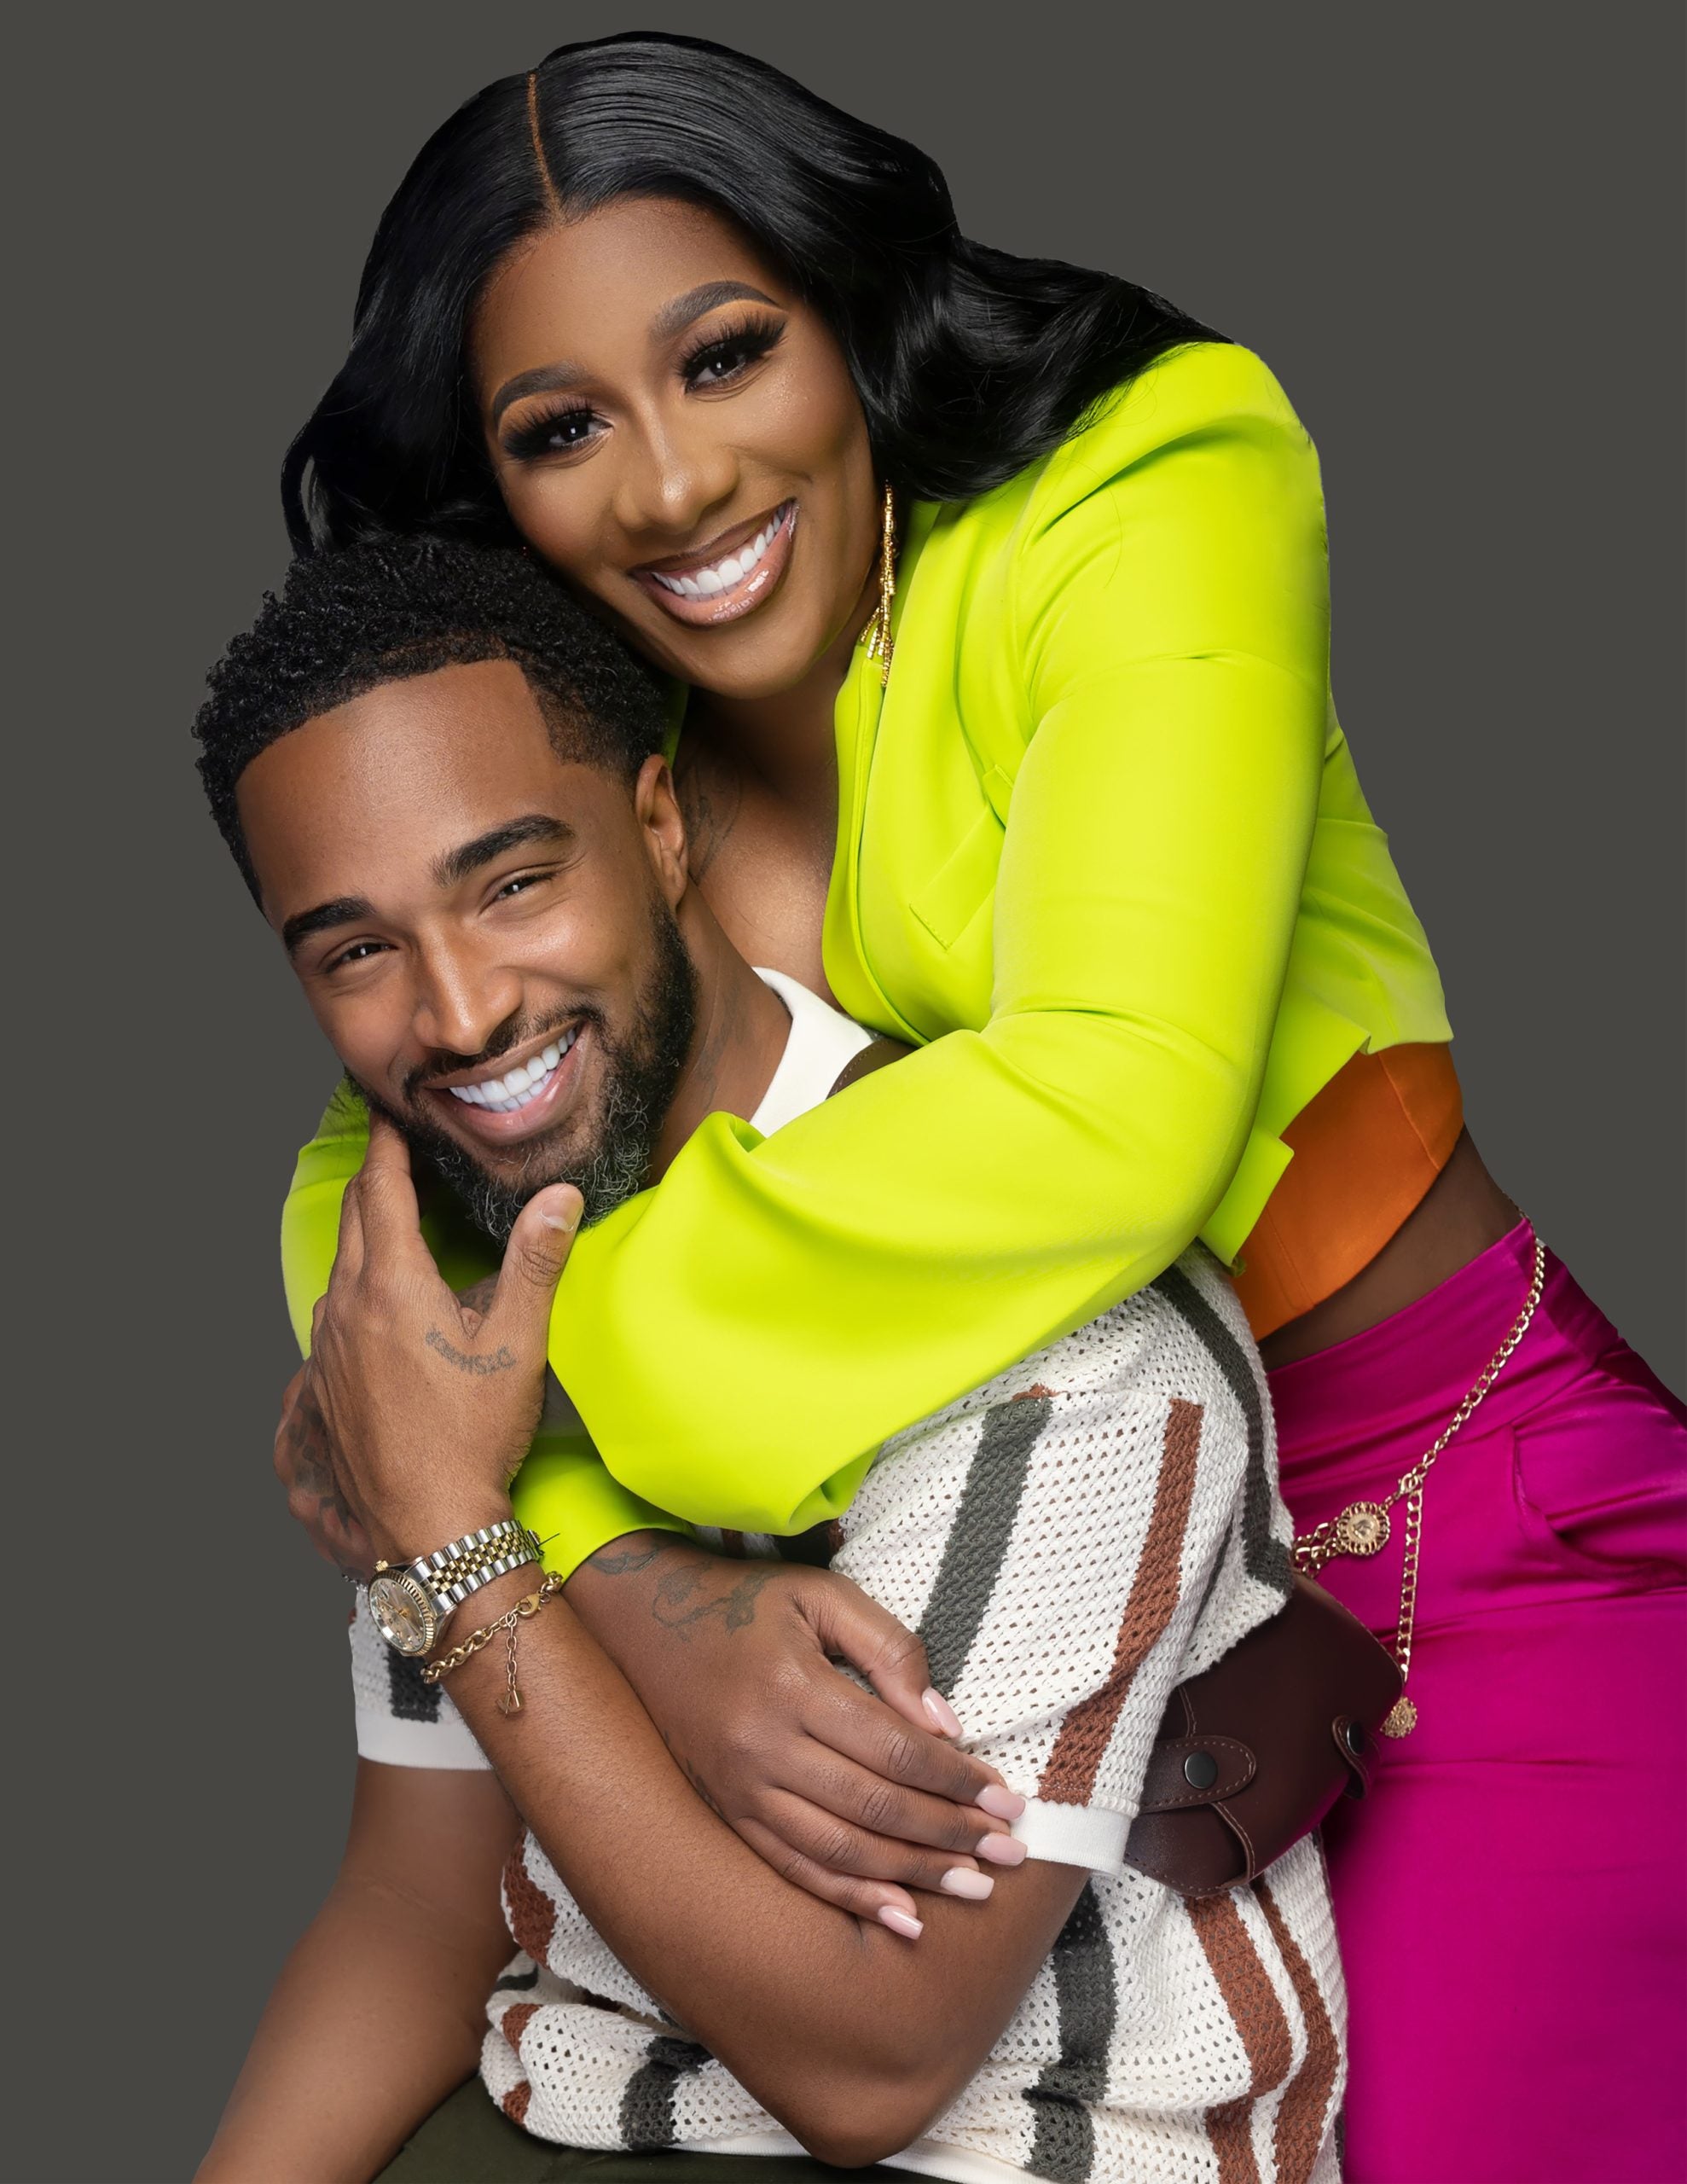 Exclusive: Beauty Mogul Raynell 'Supa' Steward & Fiancé Rayzor Share Their Love Story And Gorgeous Engagement Shoot